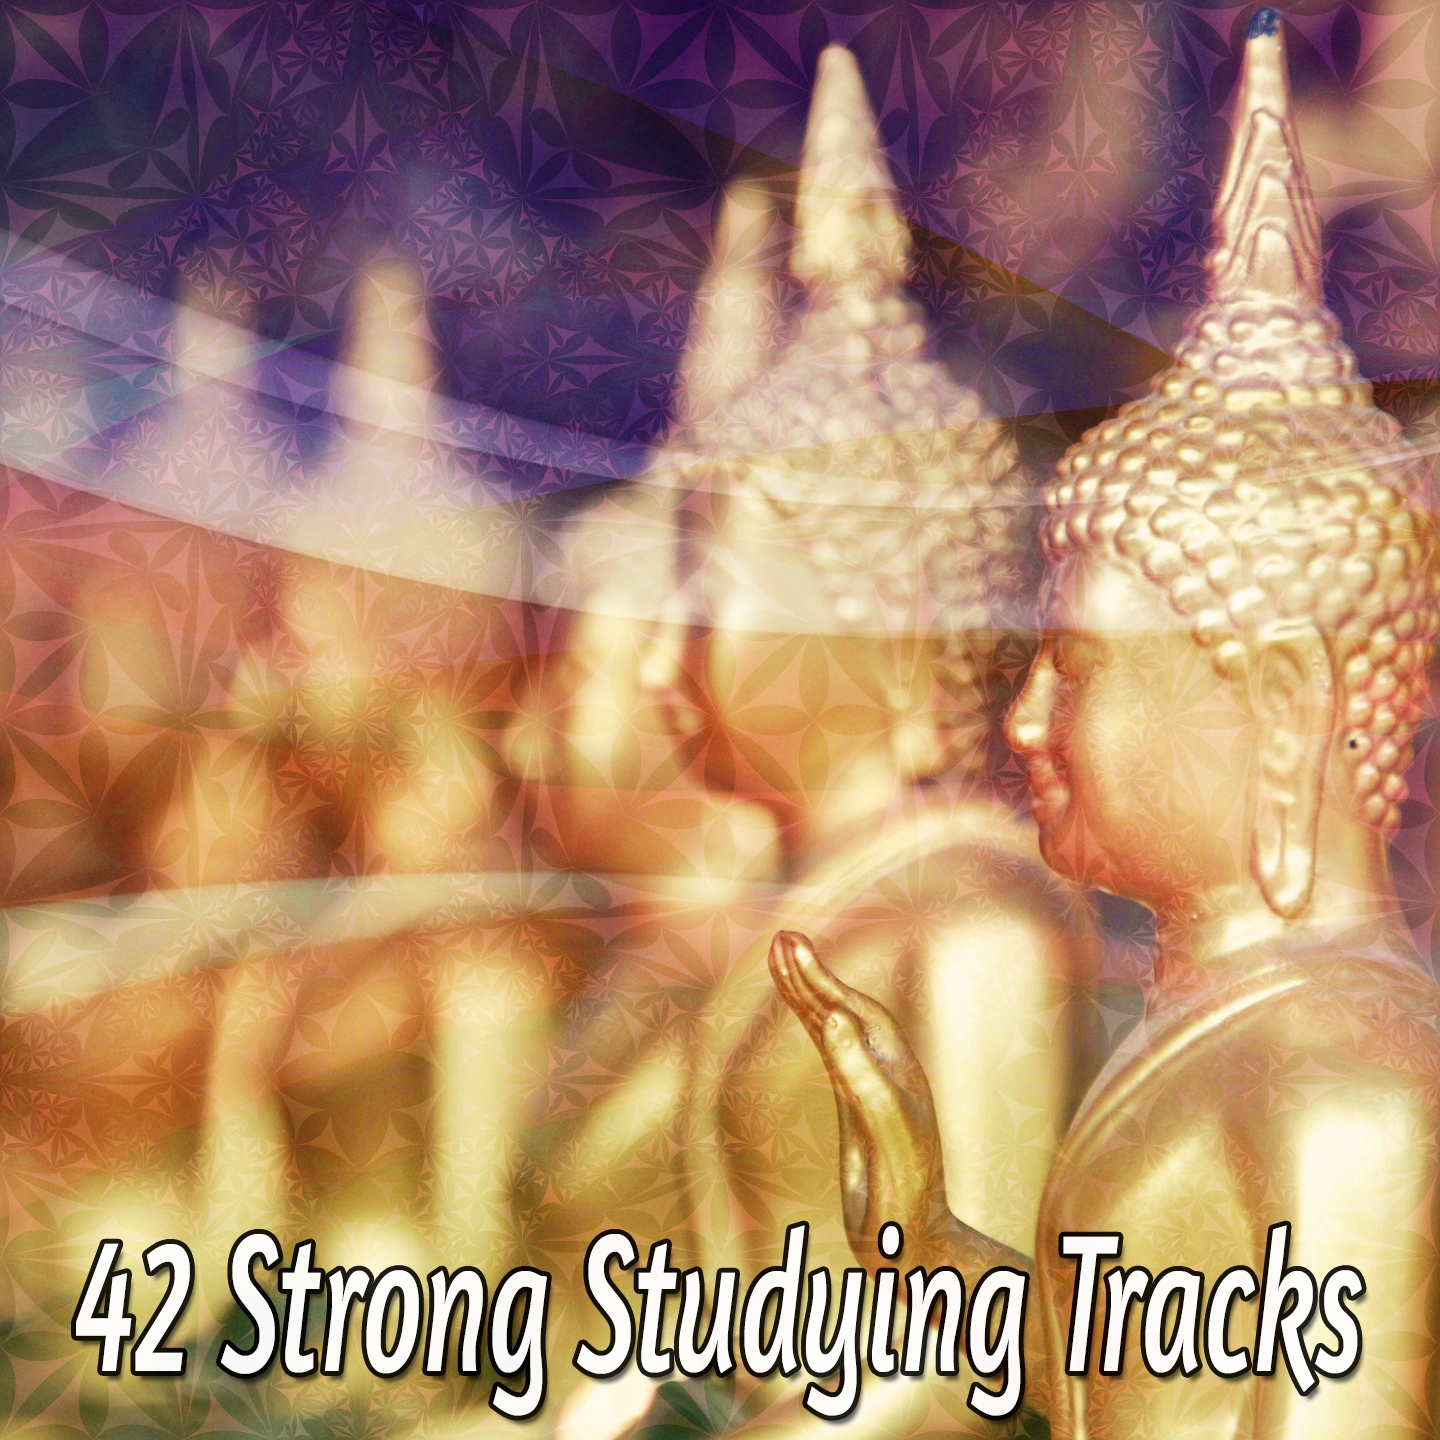 42 Strong Studying Tracks